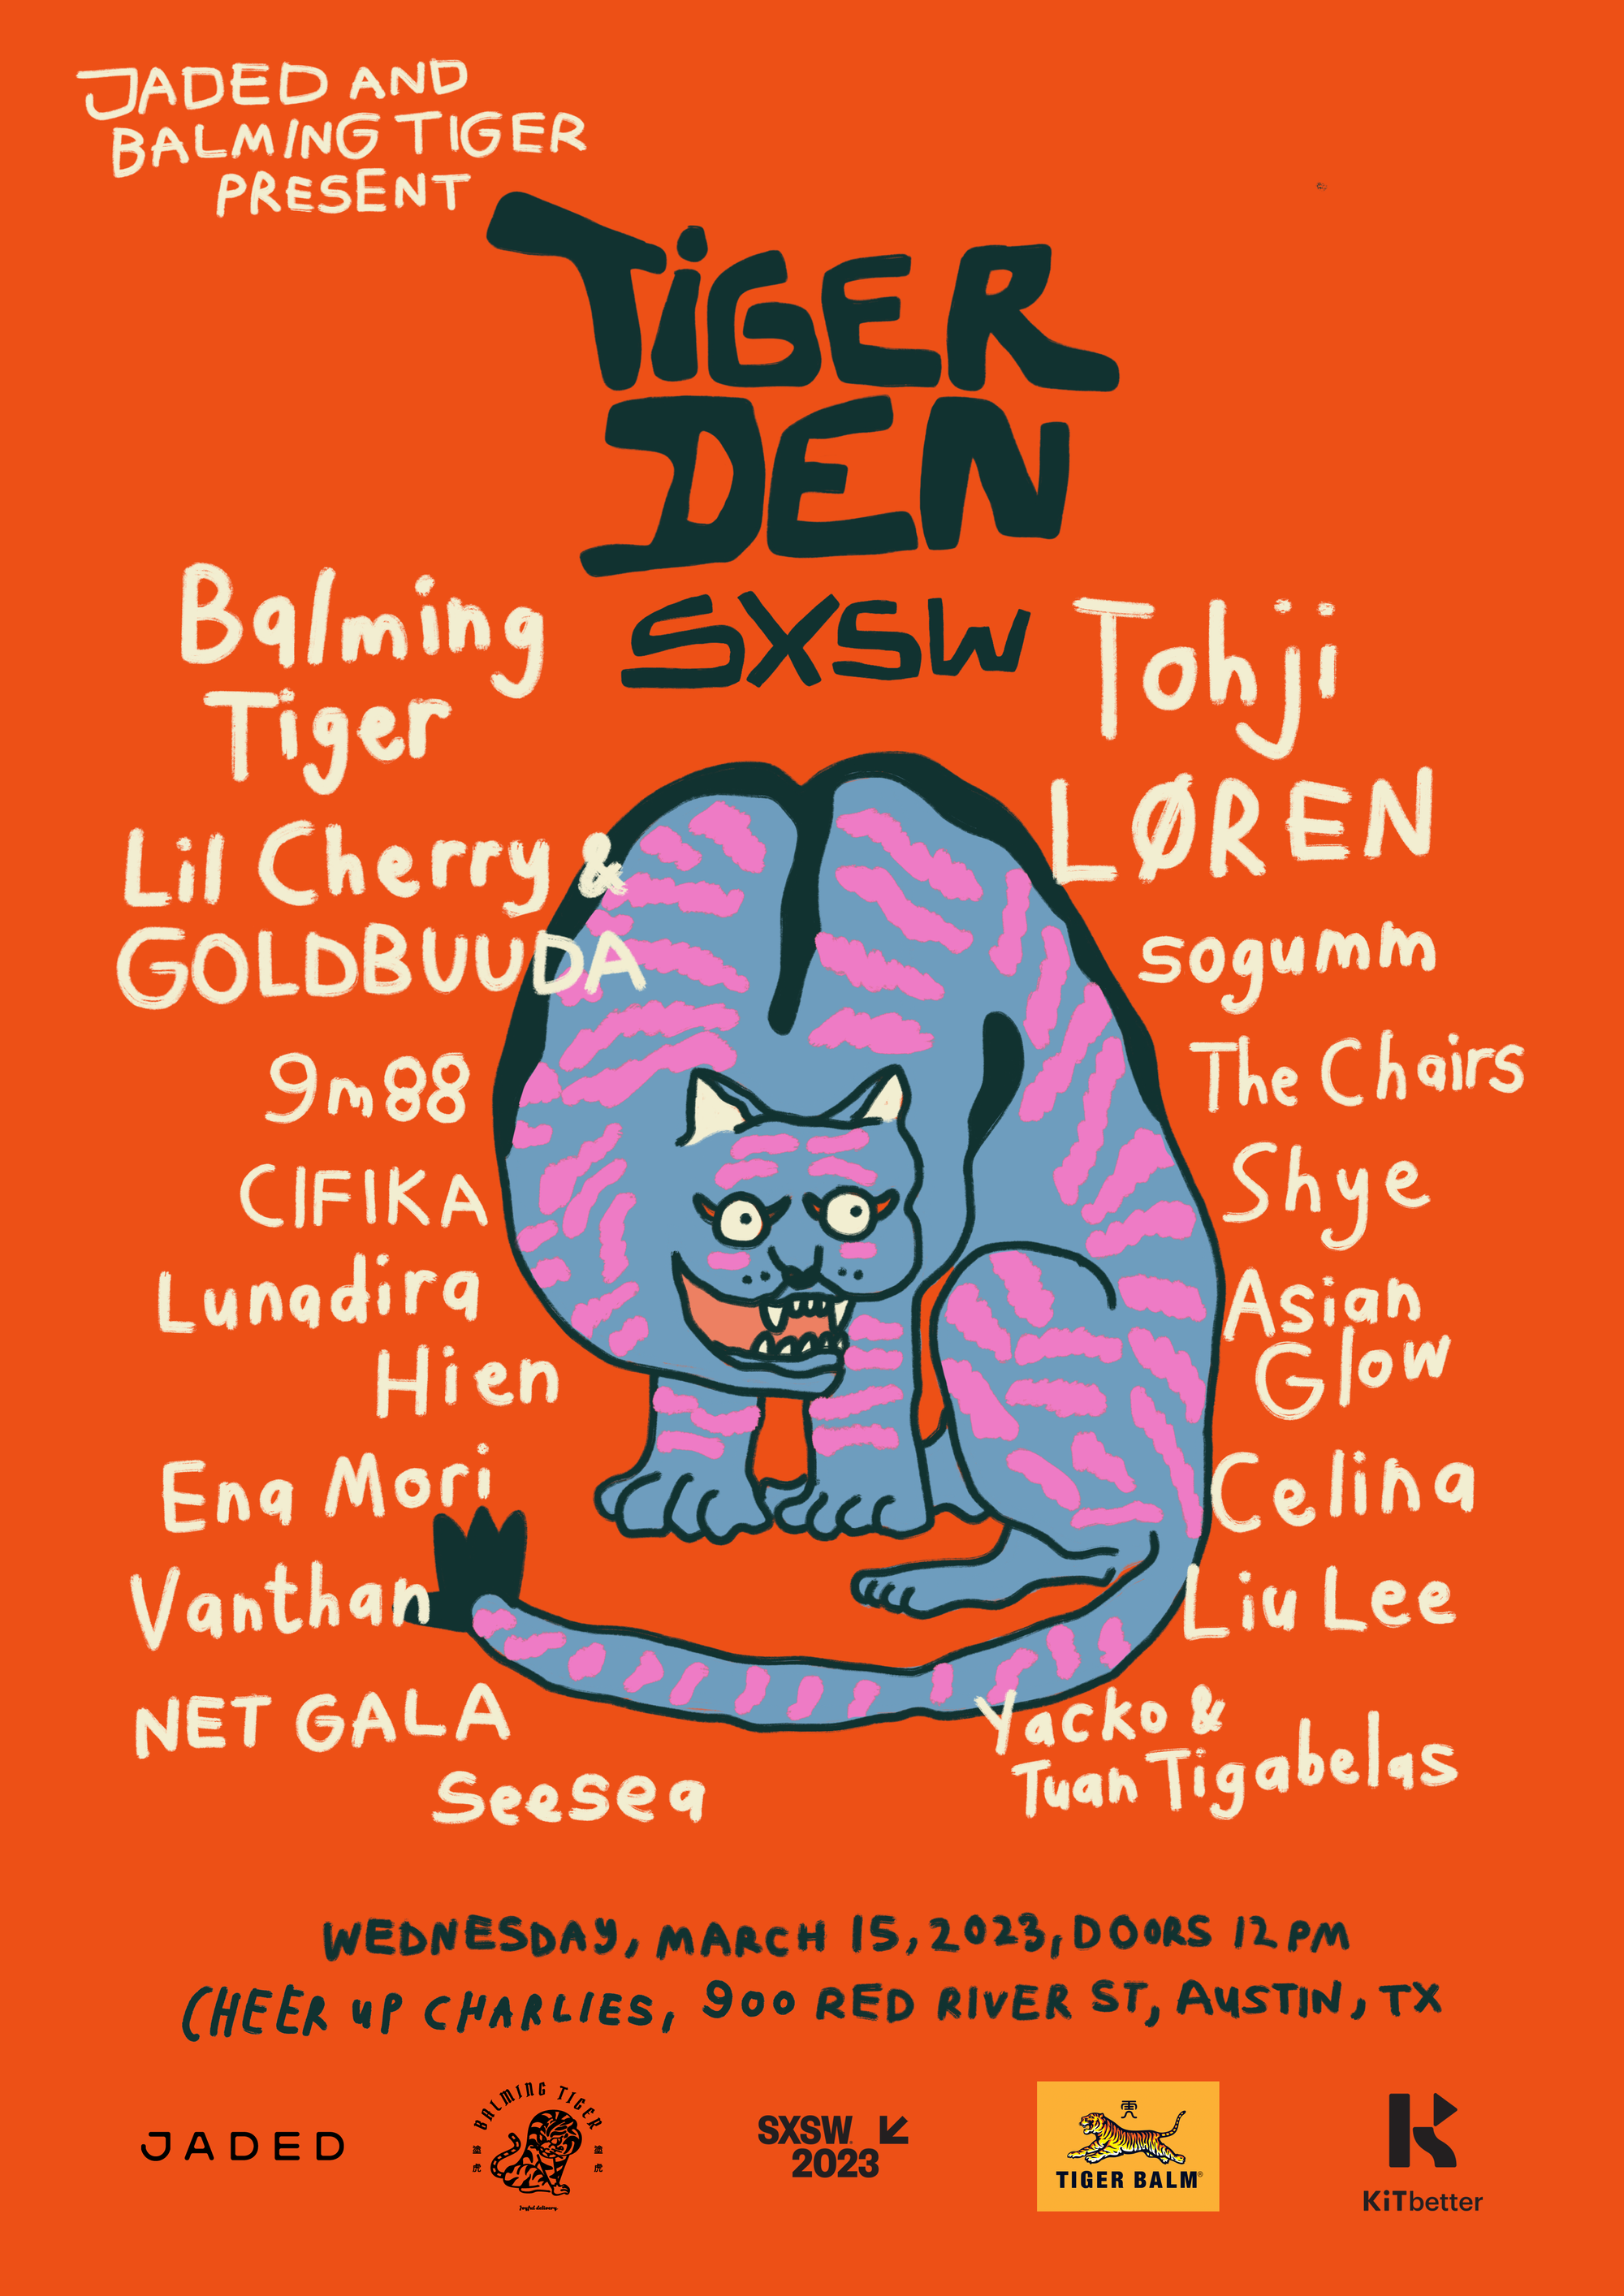 Lineup poster for Jaded and Balming Tiger present: Tiger Den at SXSW 2023, featuring 19 acts from throughout Asia. 